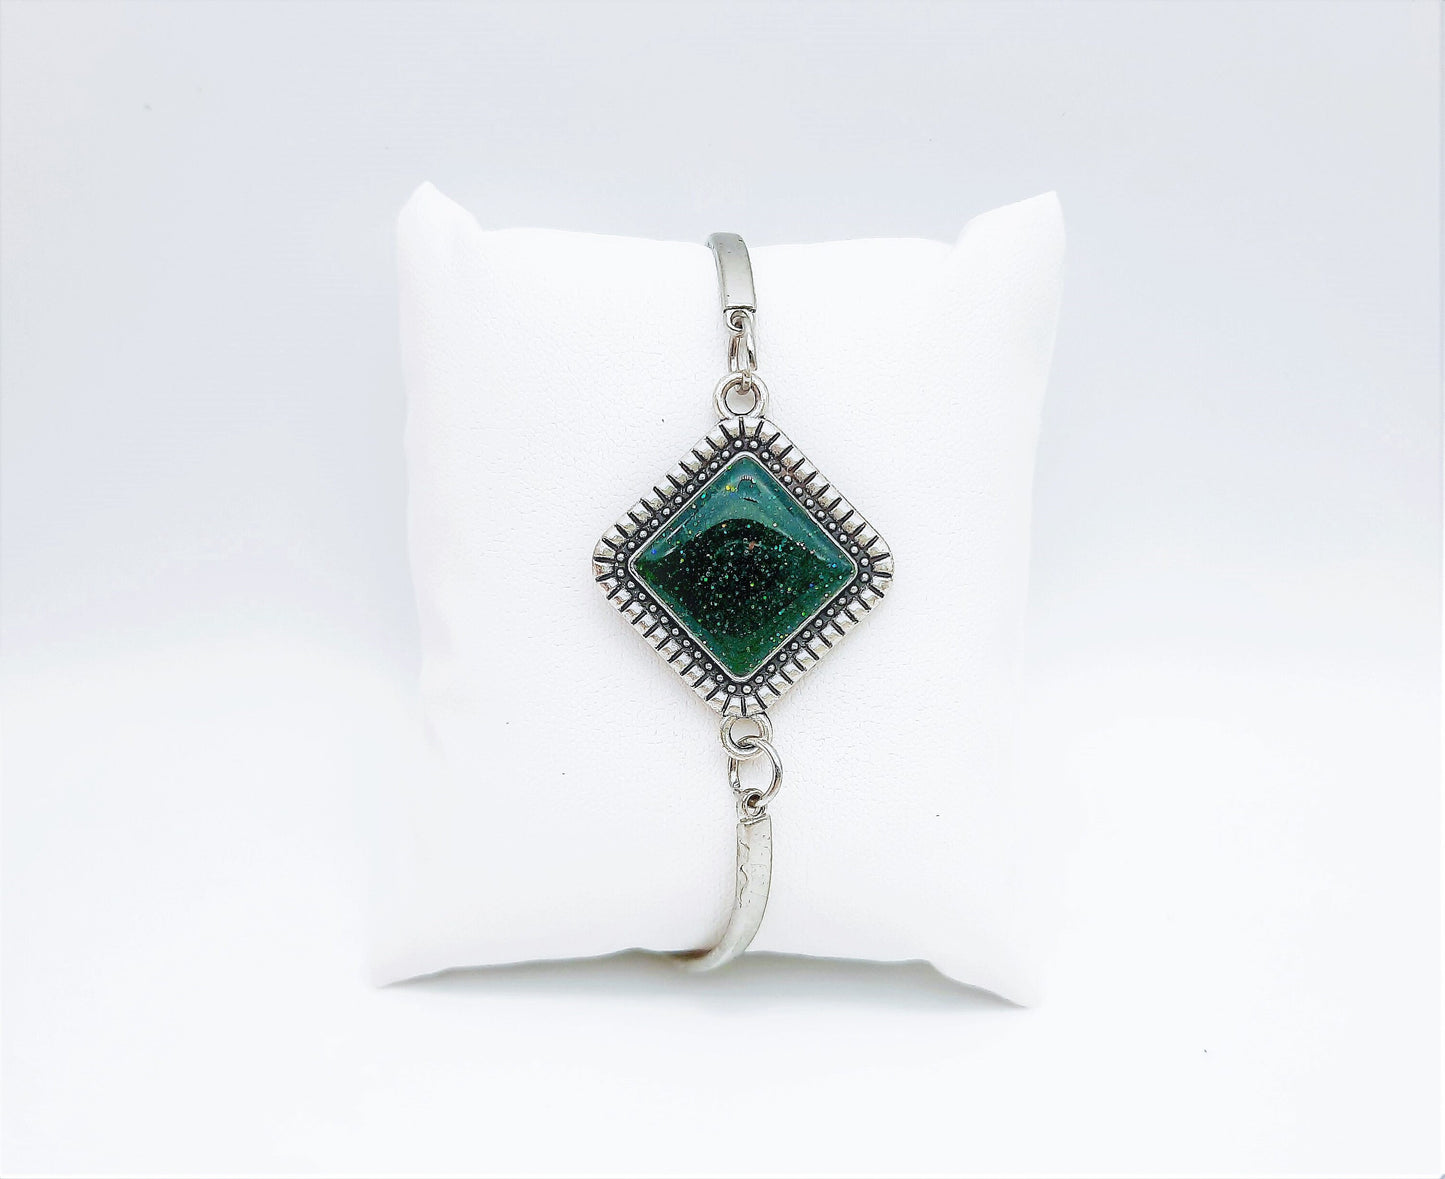 Handcrafted Iridescent Green Square / Diamond Adjustable Bangle Bracelet - Made with Resin, Glitter, & Holographic Powder - Hypoallergenic